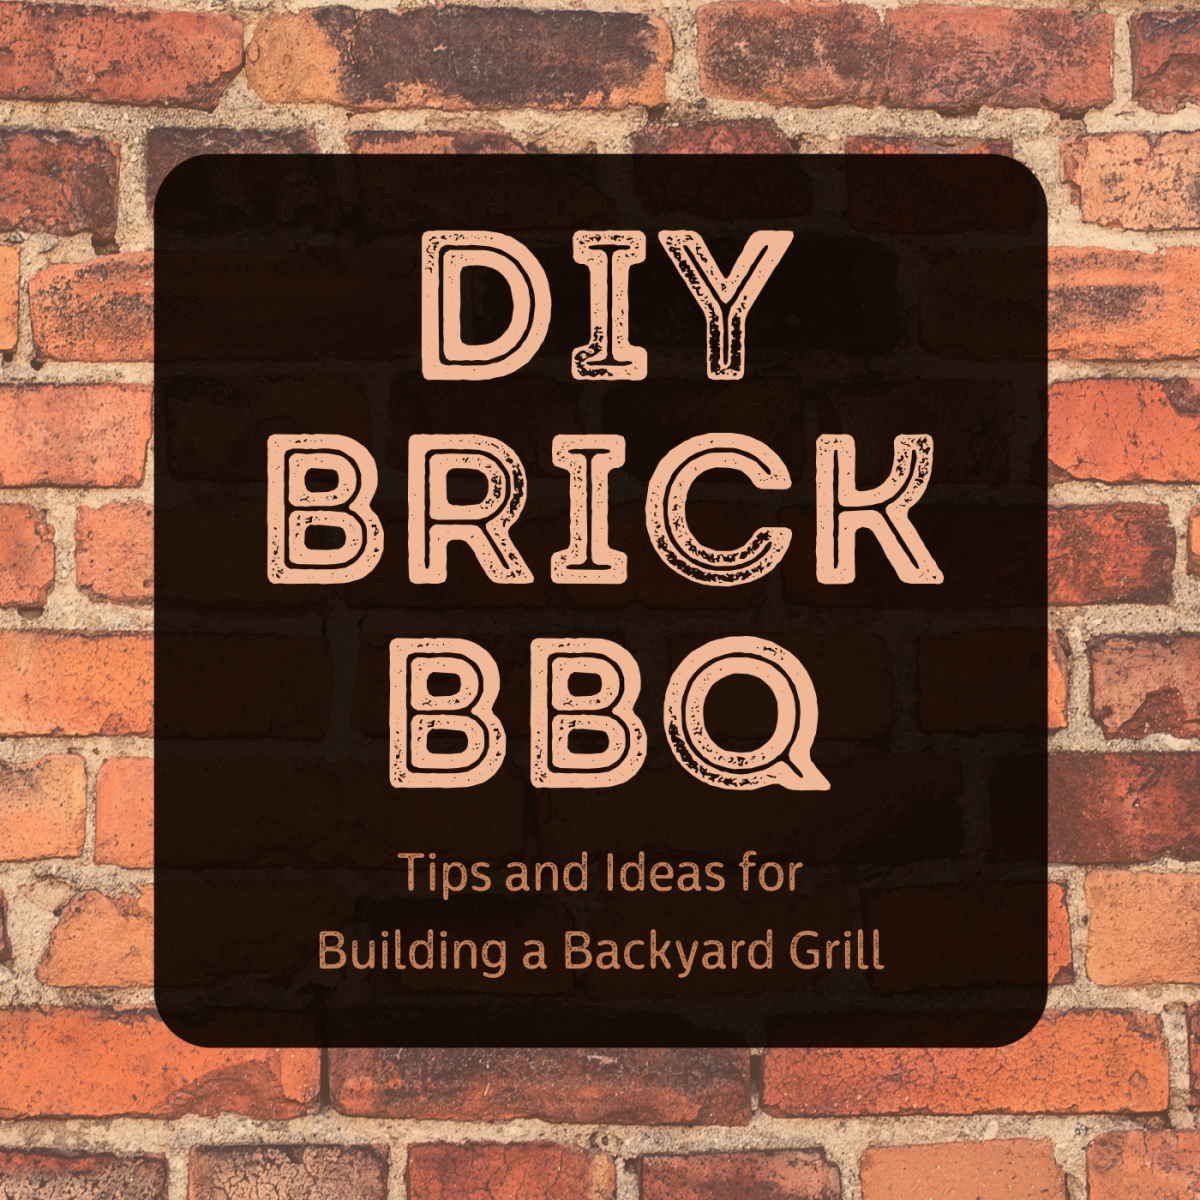 How To Build An Outdoor Brick Bbq Grill, Outdoor Brick Charcoal Grill Ideas